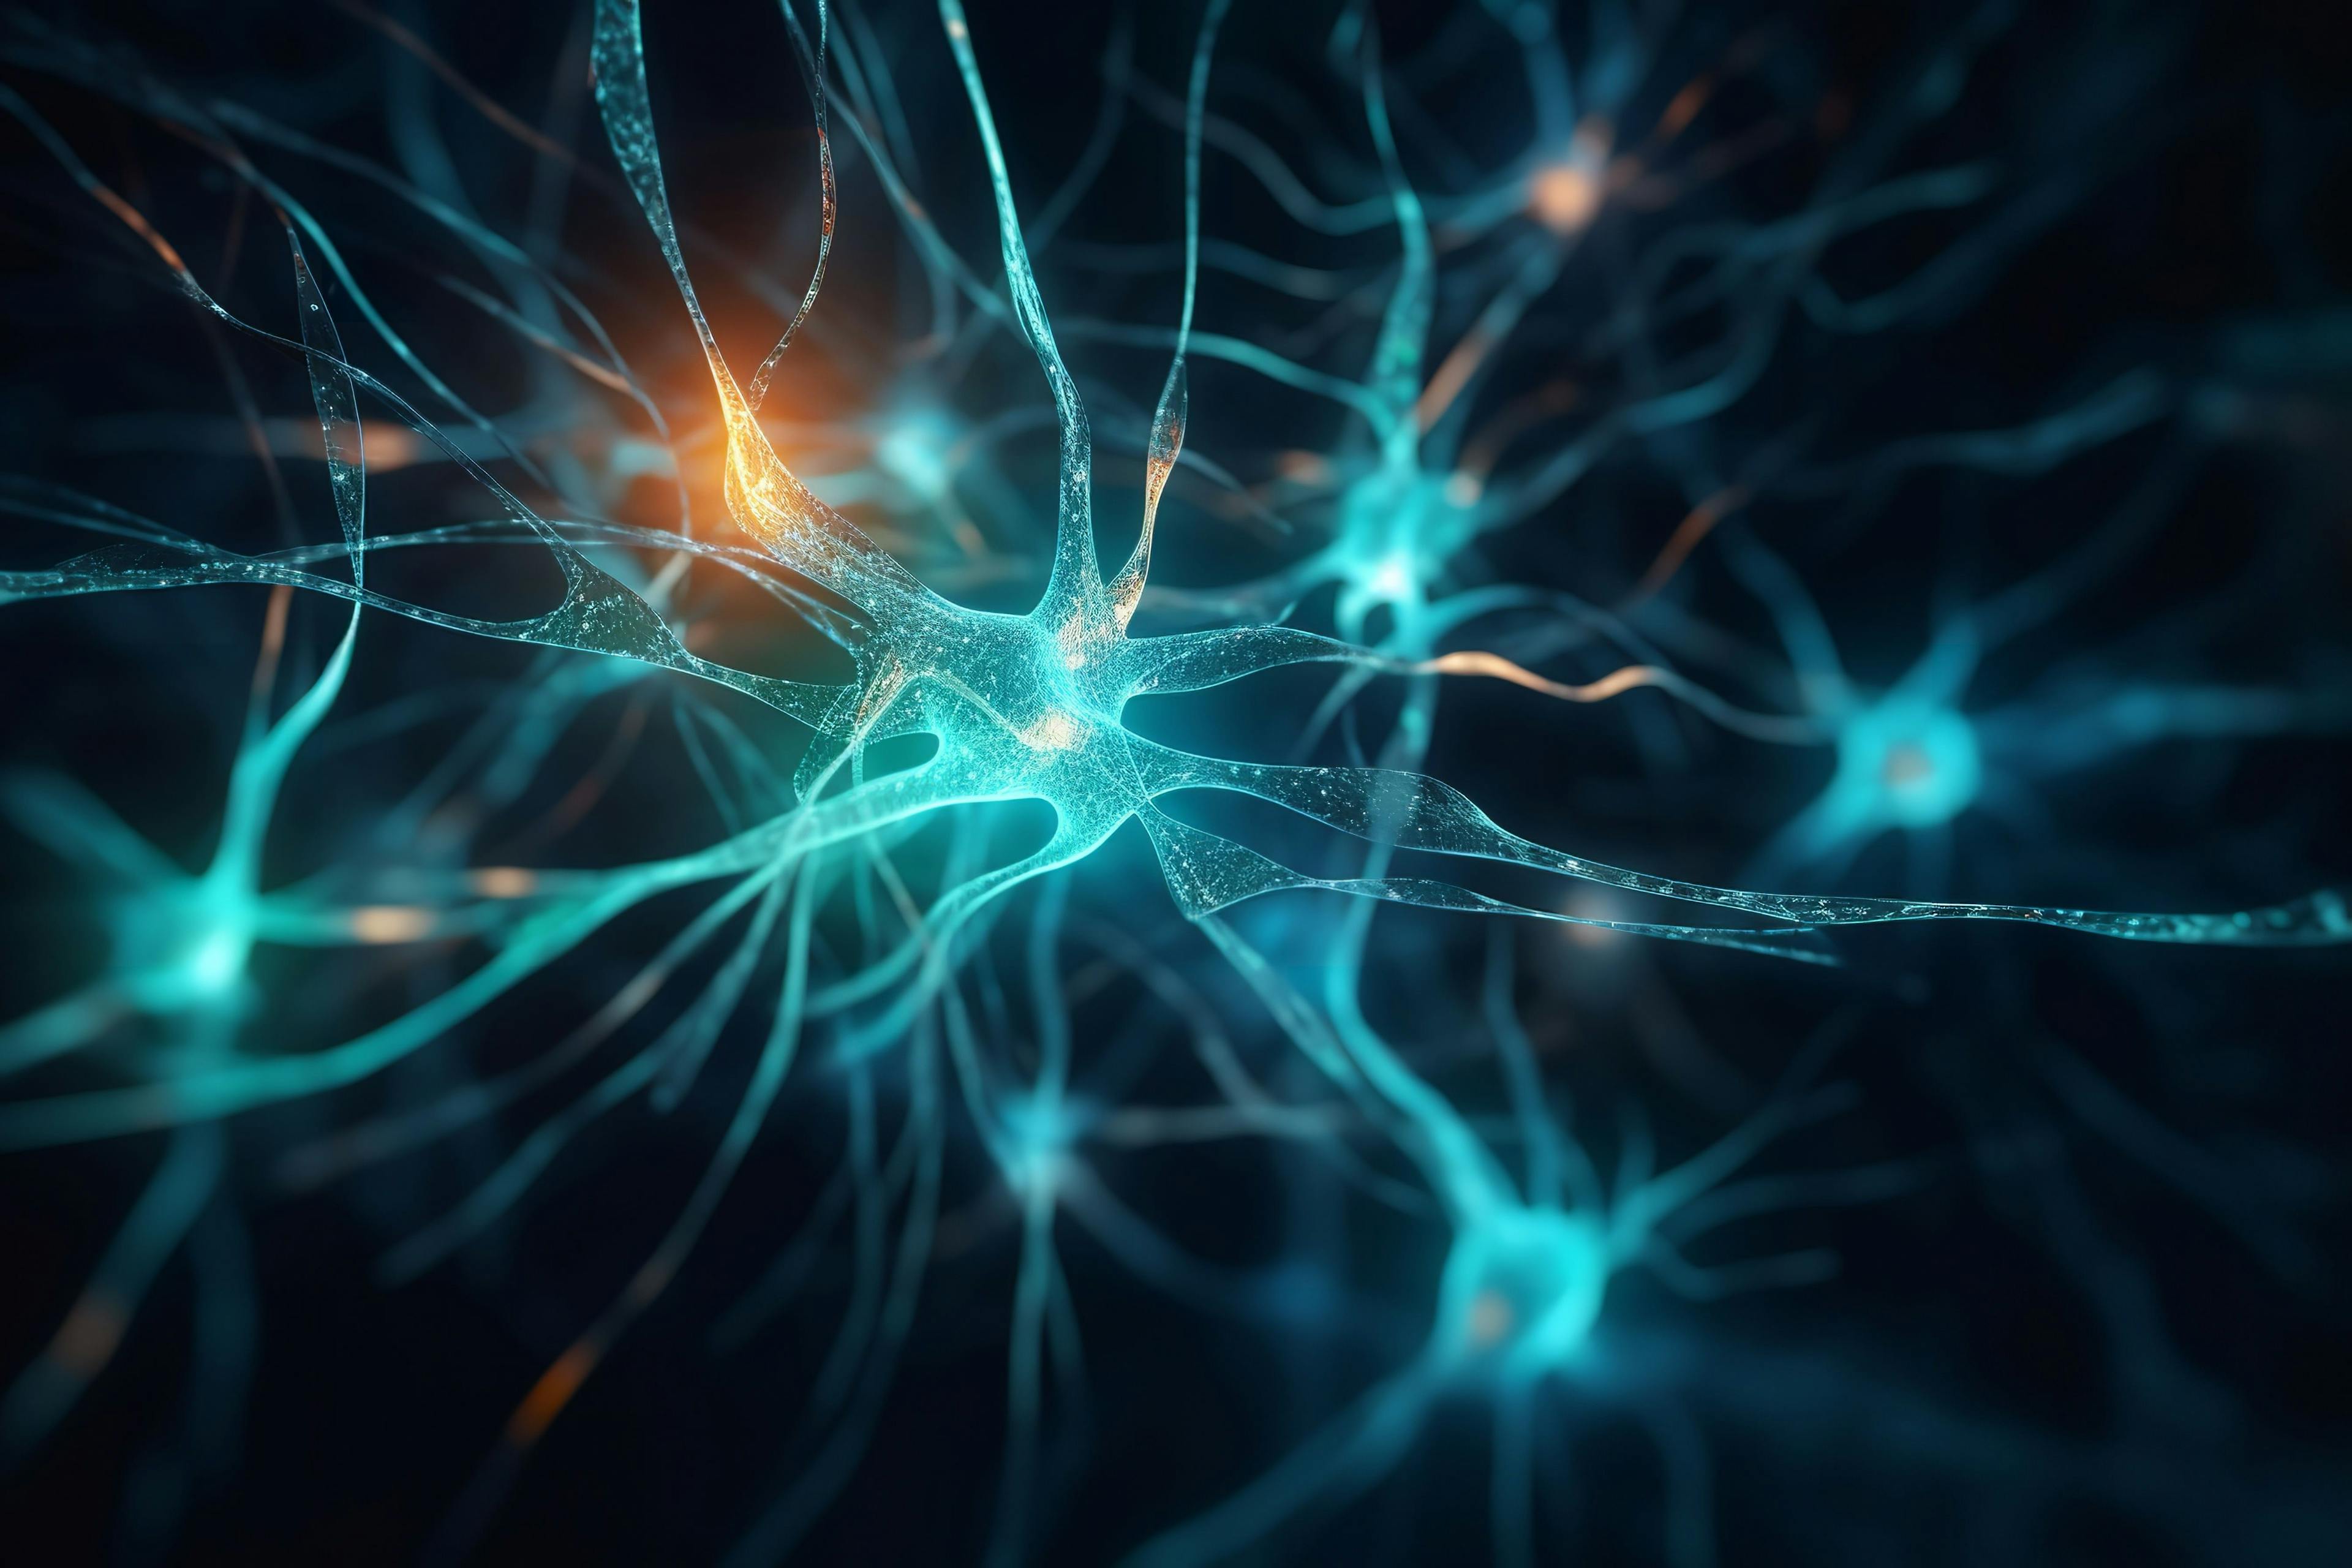 Electrifying Neuronal Network: Active Nerve Cells with Electrical Synapses, Active, Nerve Cells, Neuronal Network, Electrical Synapses, Neuroscience, Brain, Neurons, Image Credit: Adobe Stock Images/Sumon